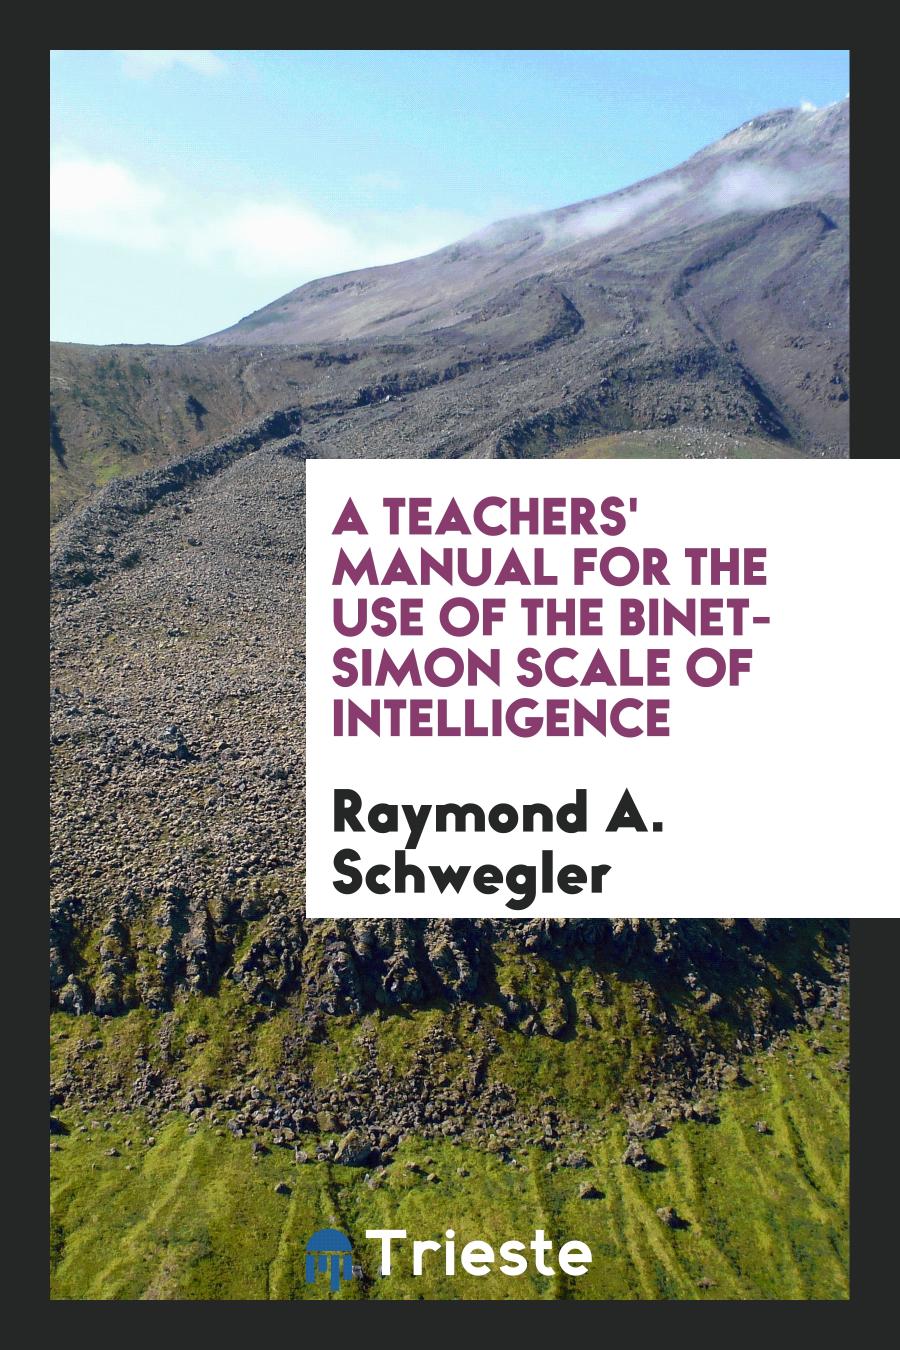 A Teachers' Manual for the Use of the Binet-Simon Scale of Intelligence